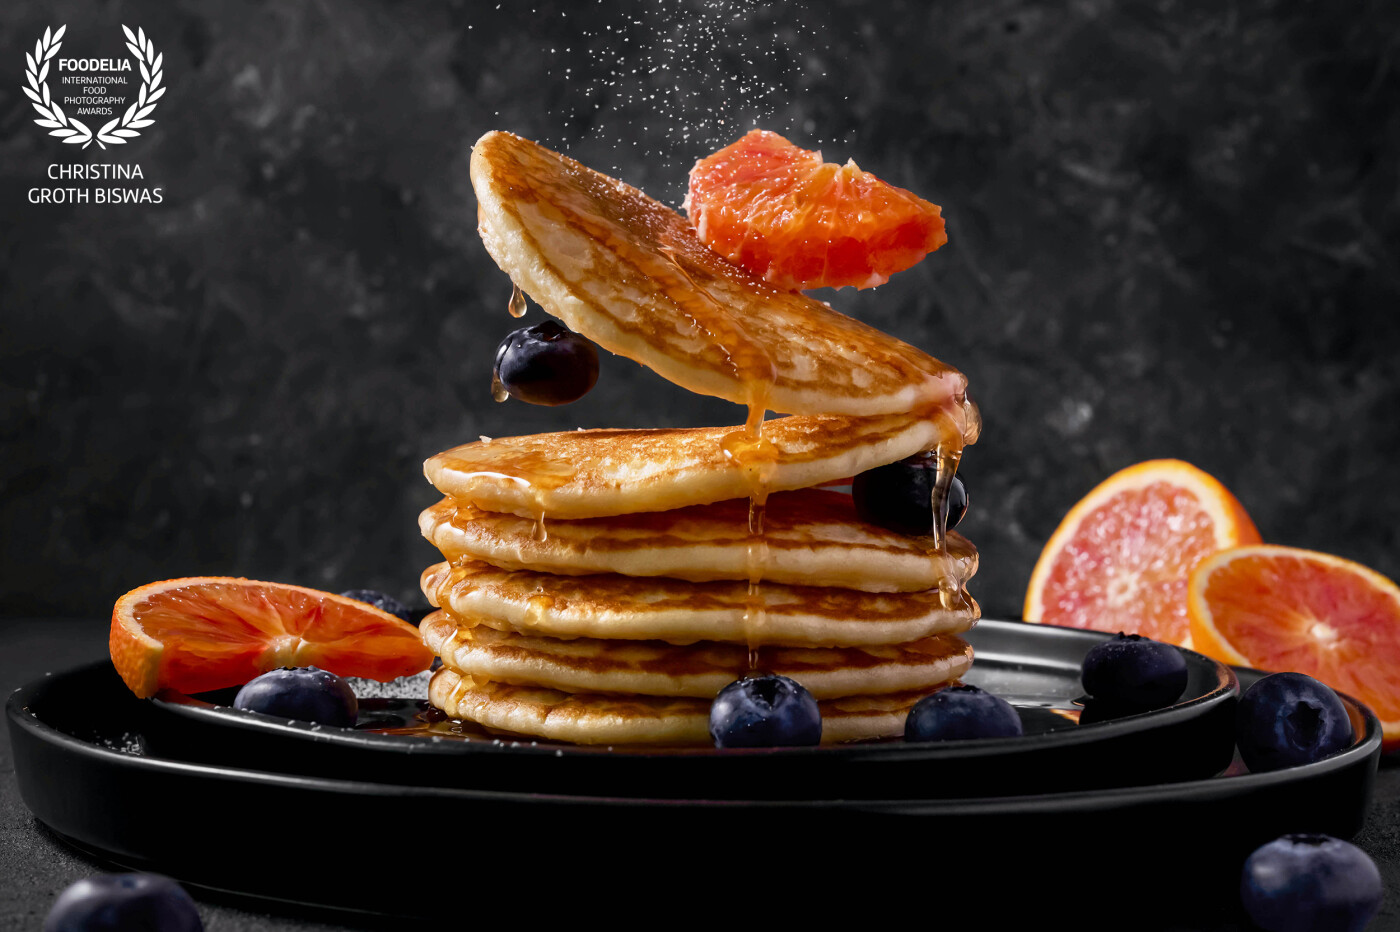 Levitation image of a stack of buttermilk pancakes with blood oranges and blueberries.